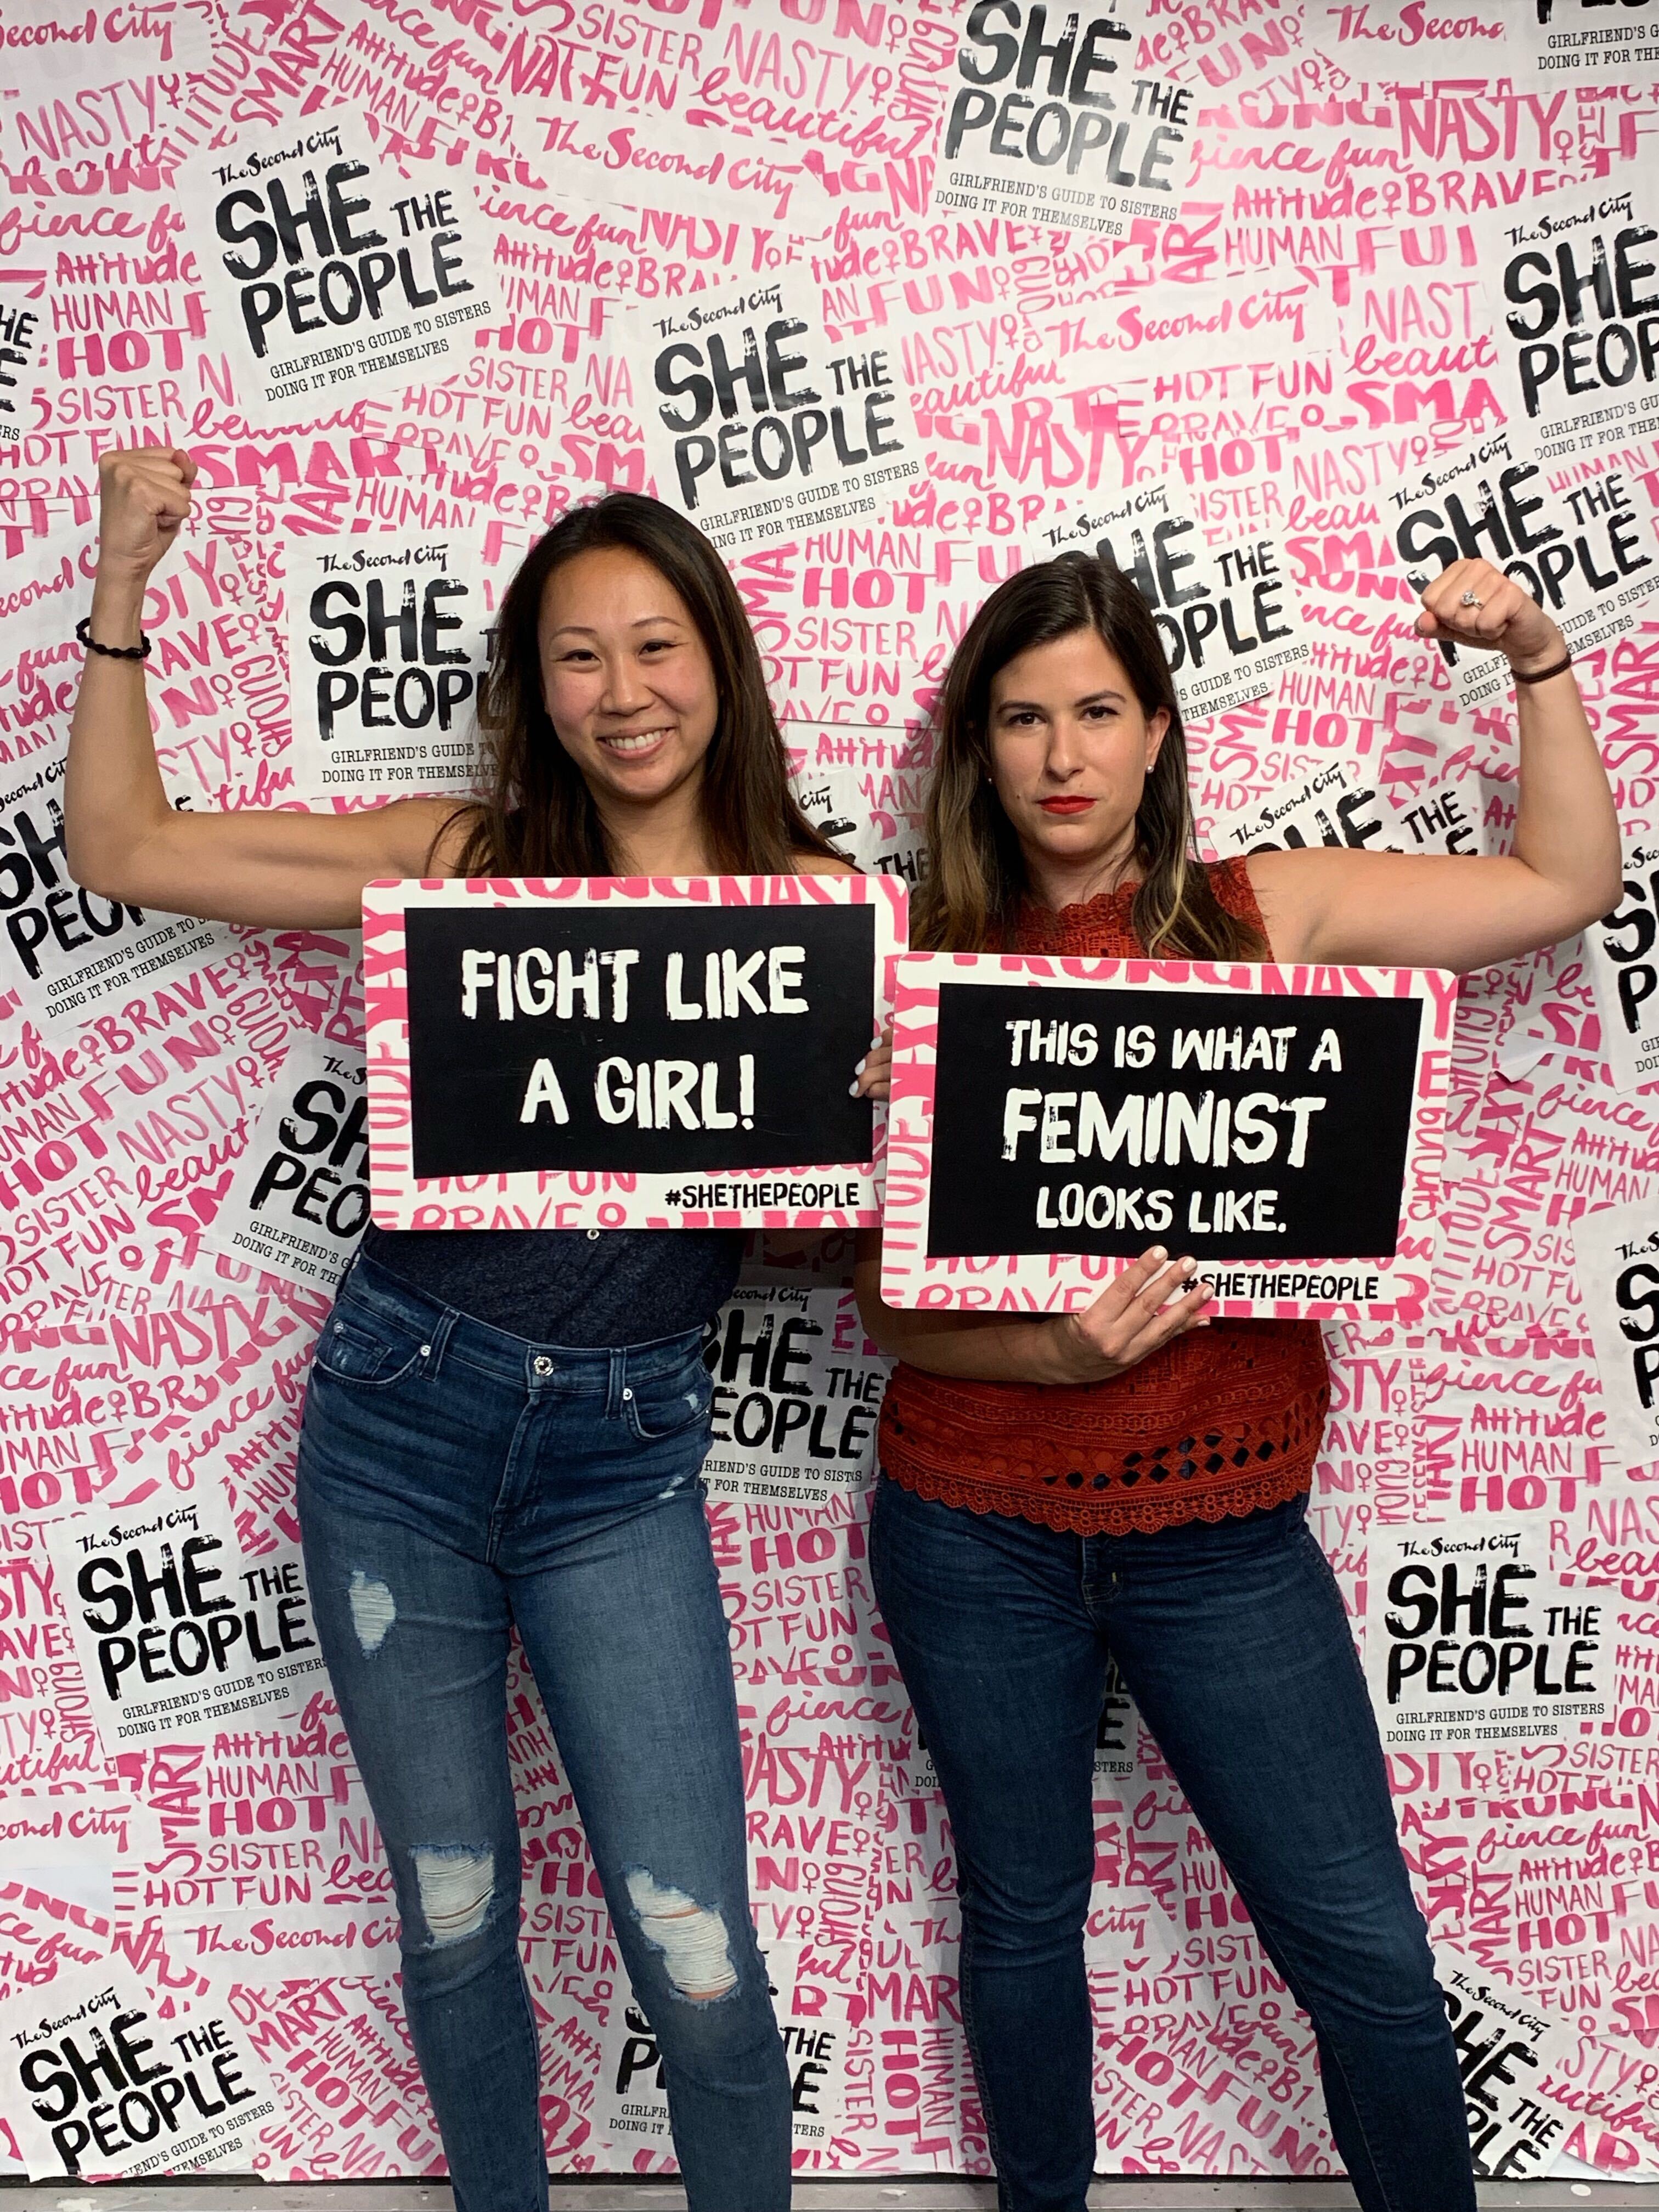 Jane and Heather, Frankly co-founders, holding up feminist signs